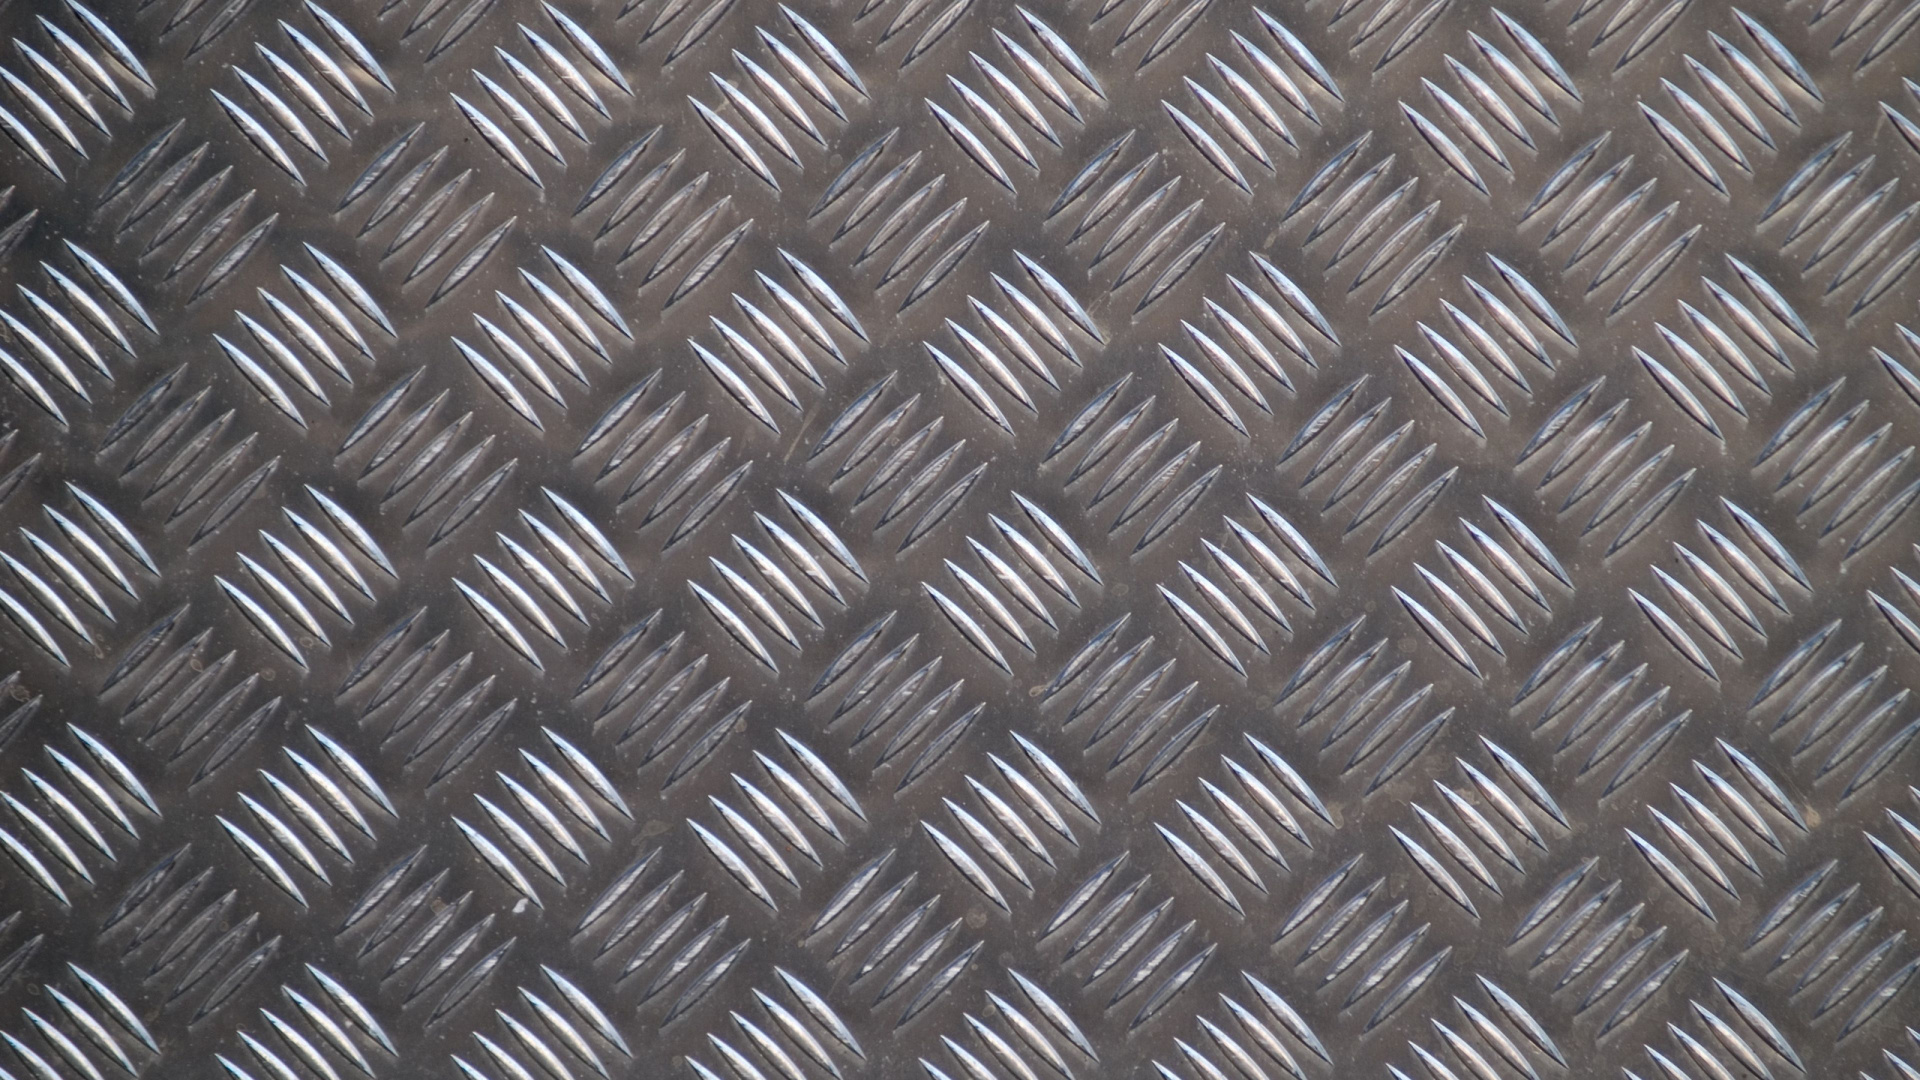 Brown Woven Textile on Brown Wooden Floor. Wallpaper in 1920x1080 Resolution